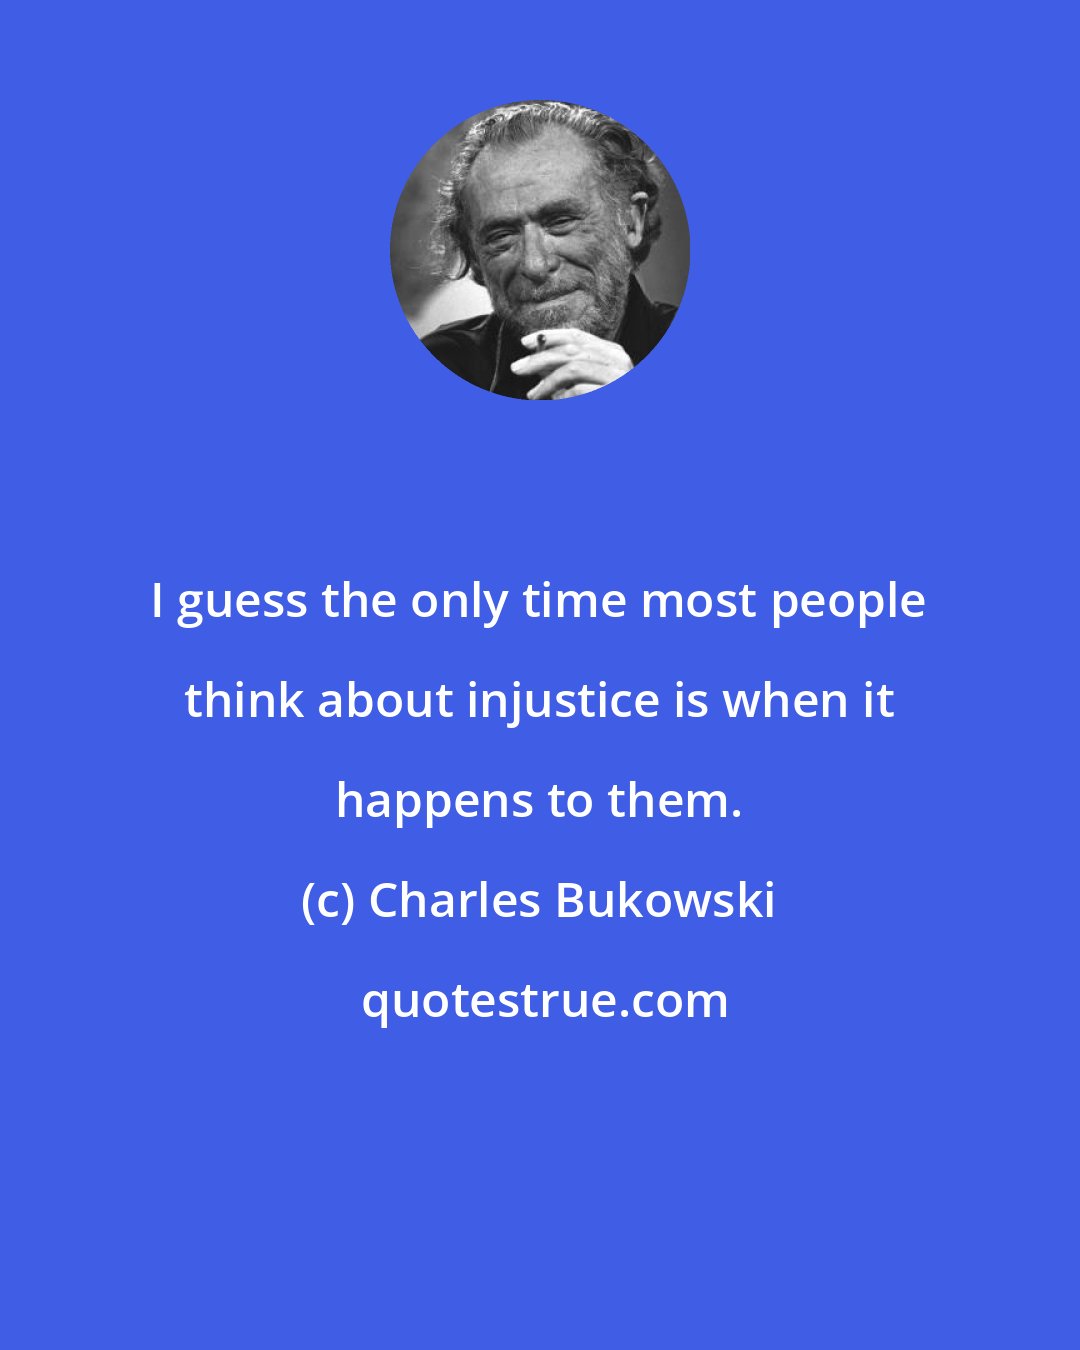 Charles Bukowski: I guess the only time most people think about injustice is when it happens to them.